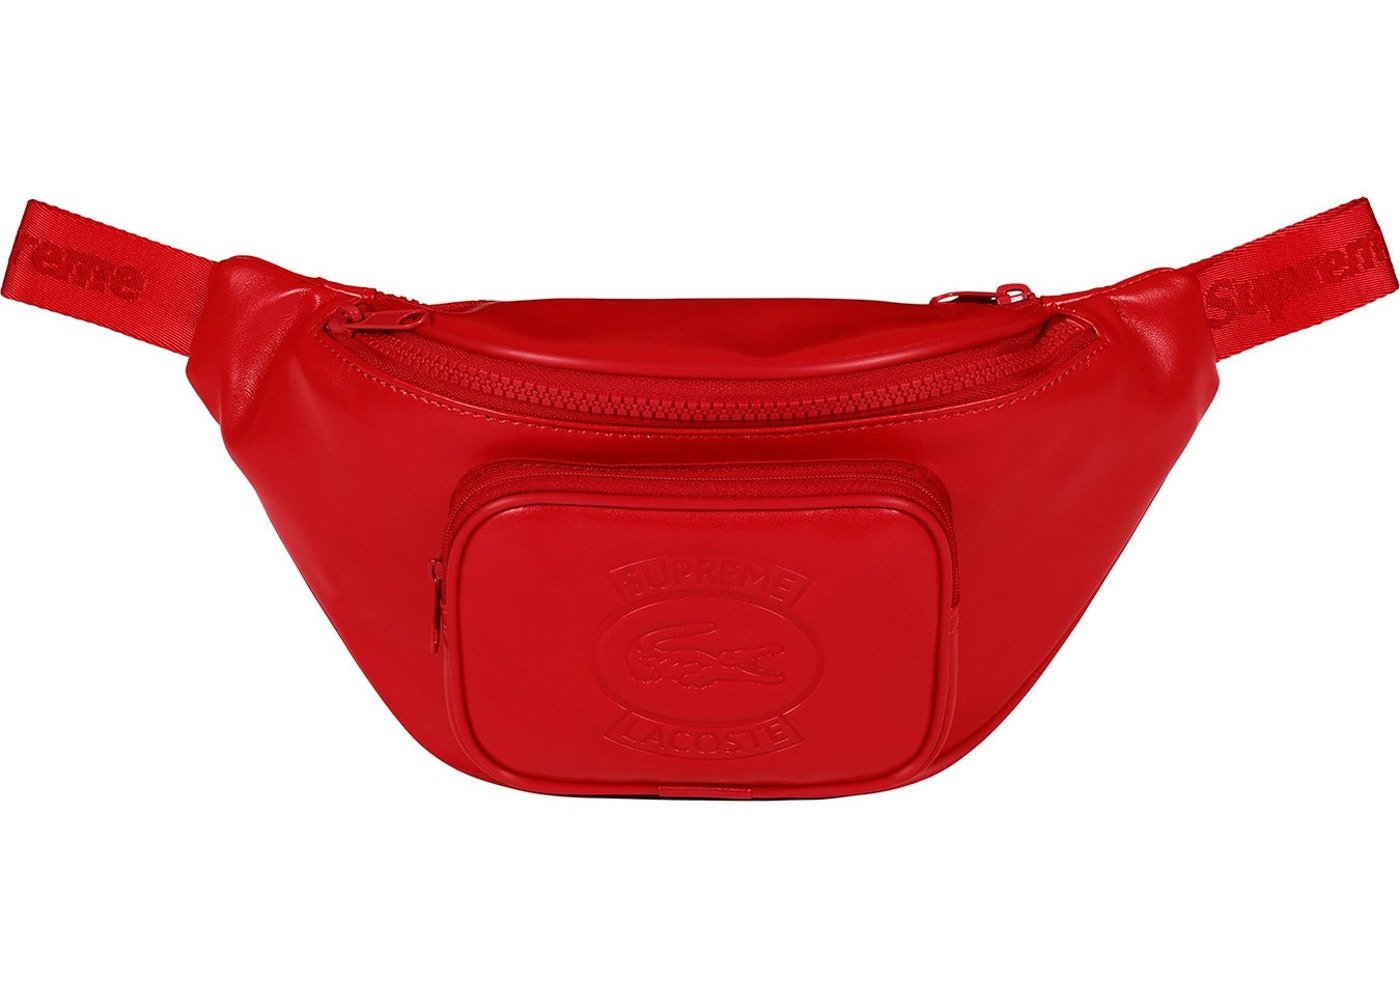 Supreme x Lacoste waist bag red | Hype 